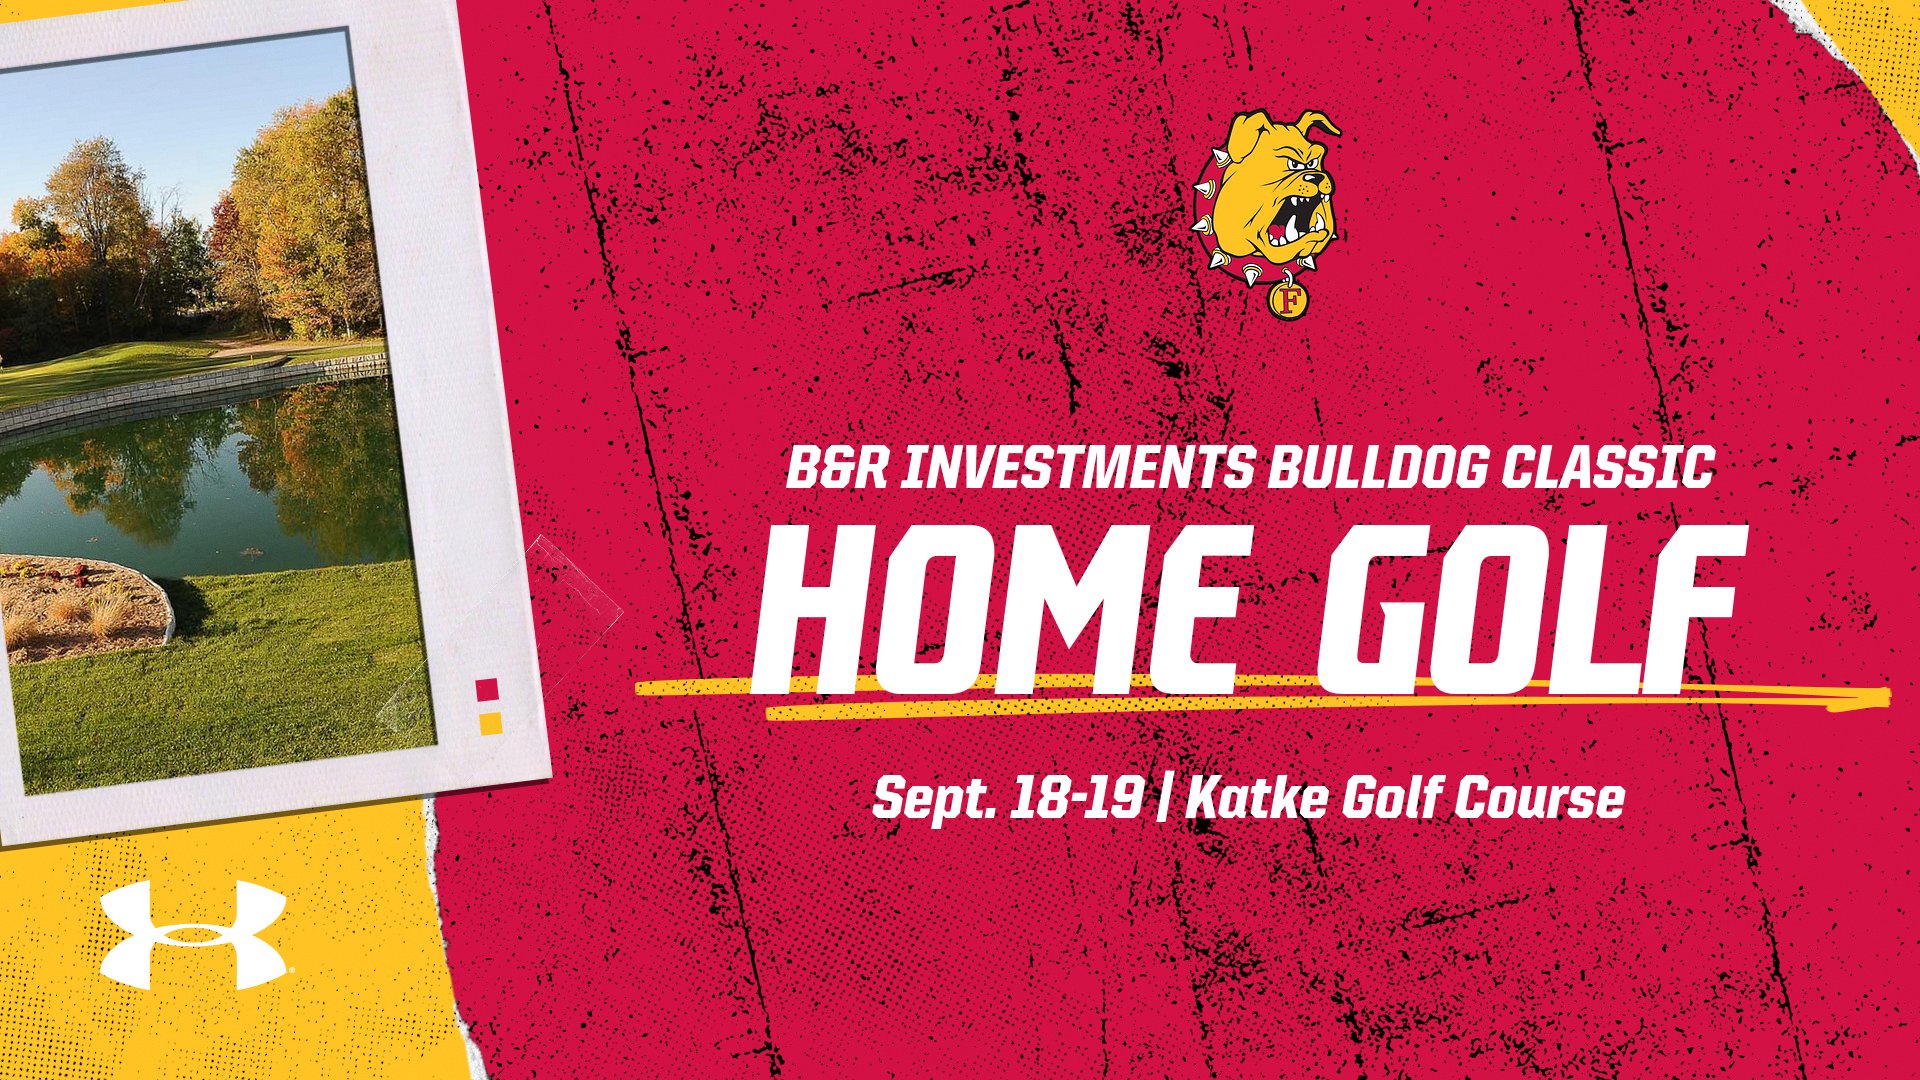 Ferris State Men's Golf To Host B&R Investments Bulldog Fall Classic This Week